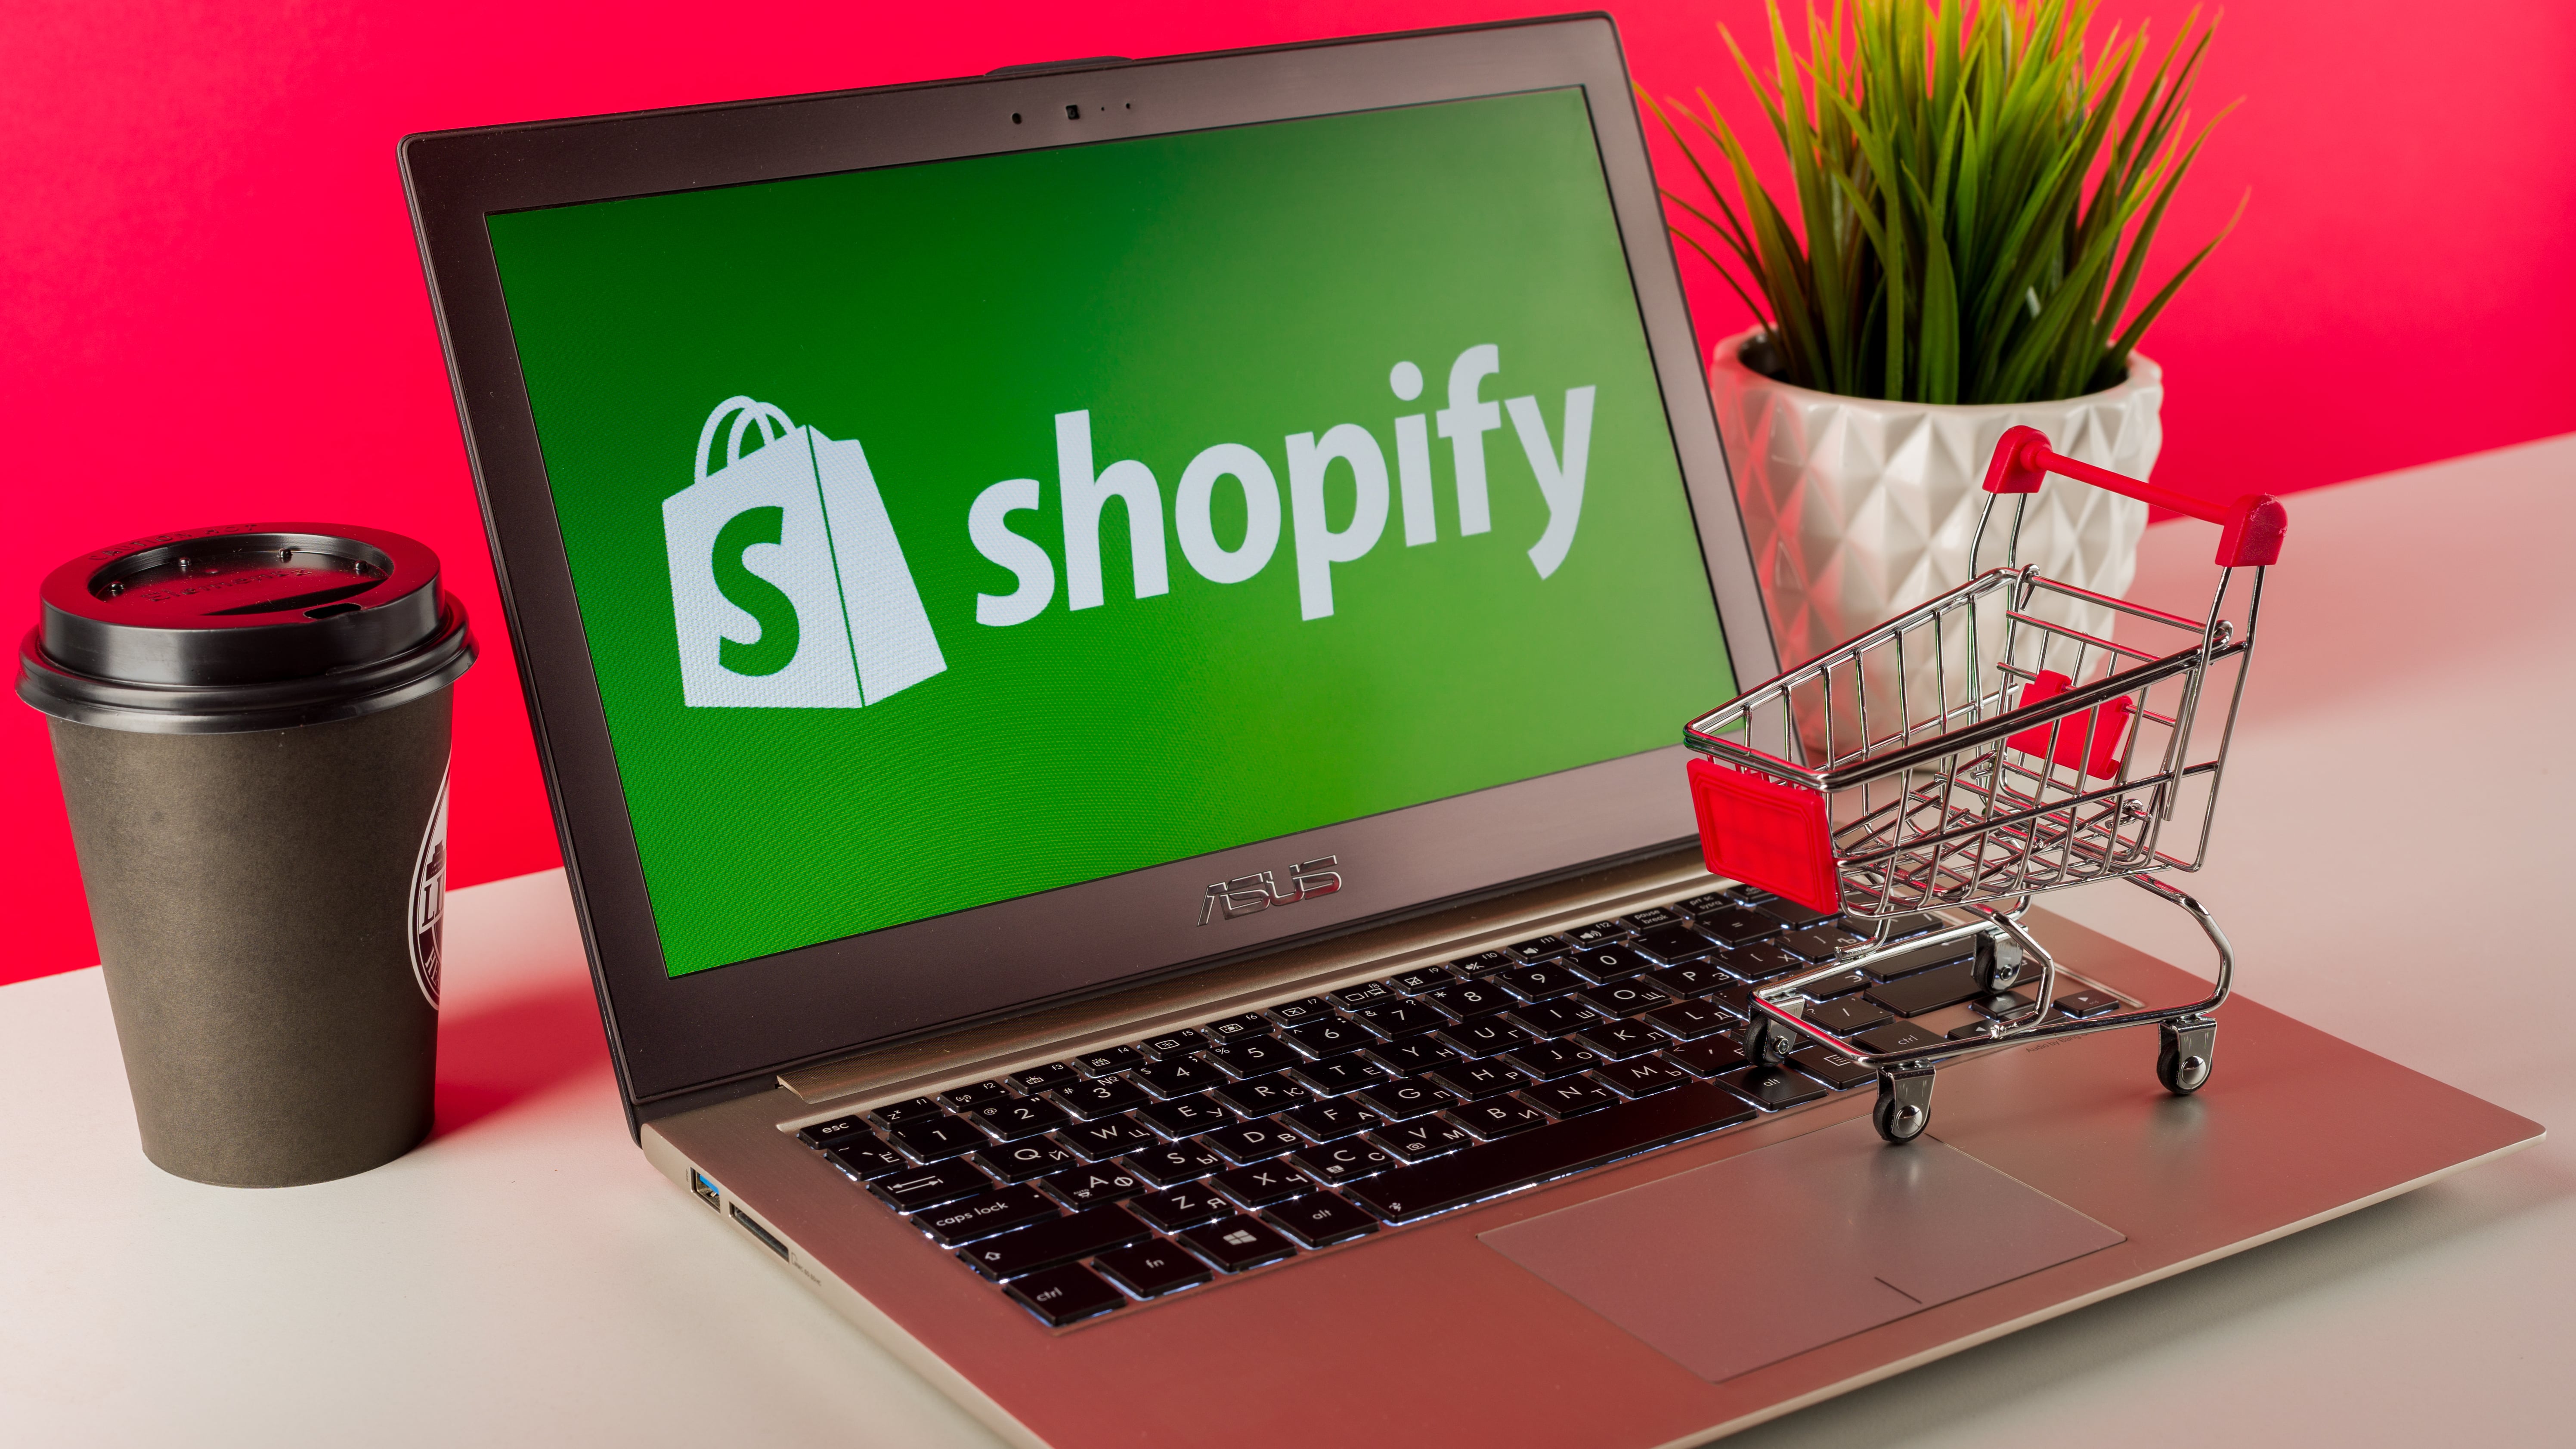 Shopify logo displayed on modern laptop on desk with shopping cart